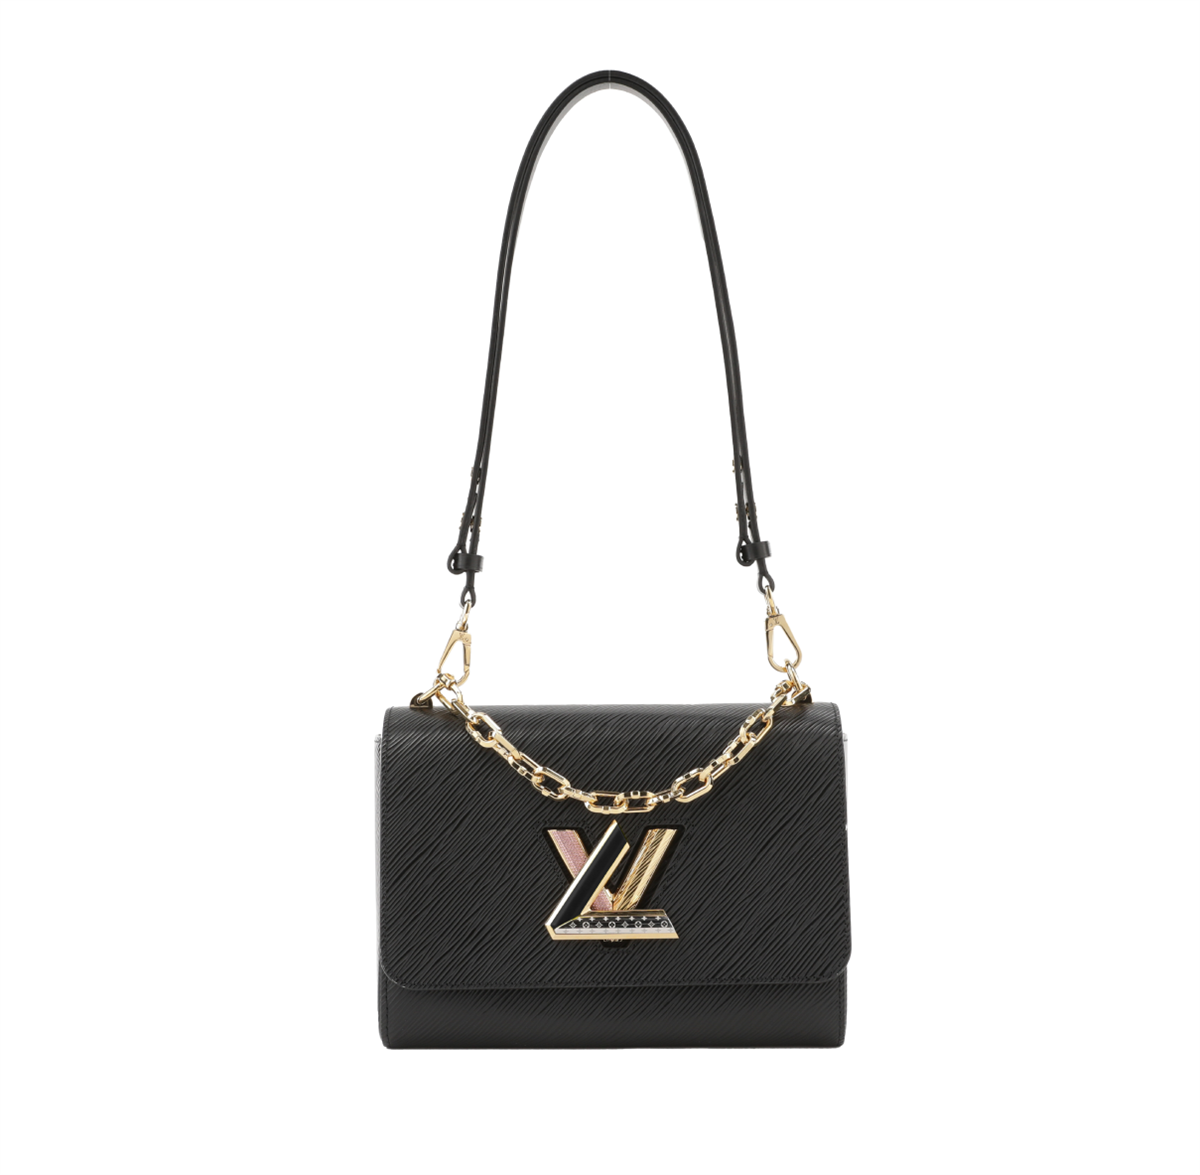 LV_Twist MM in black epi grained leather